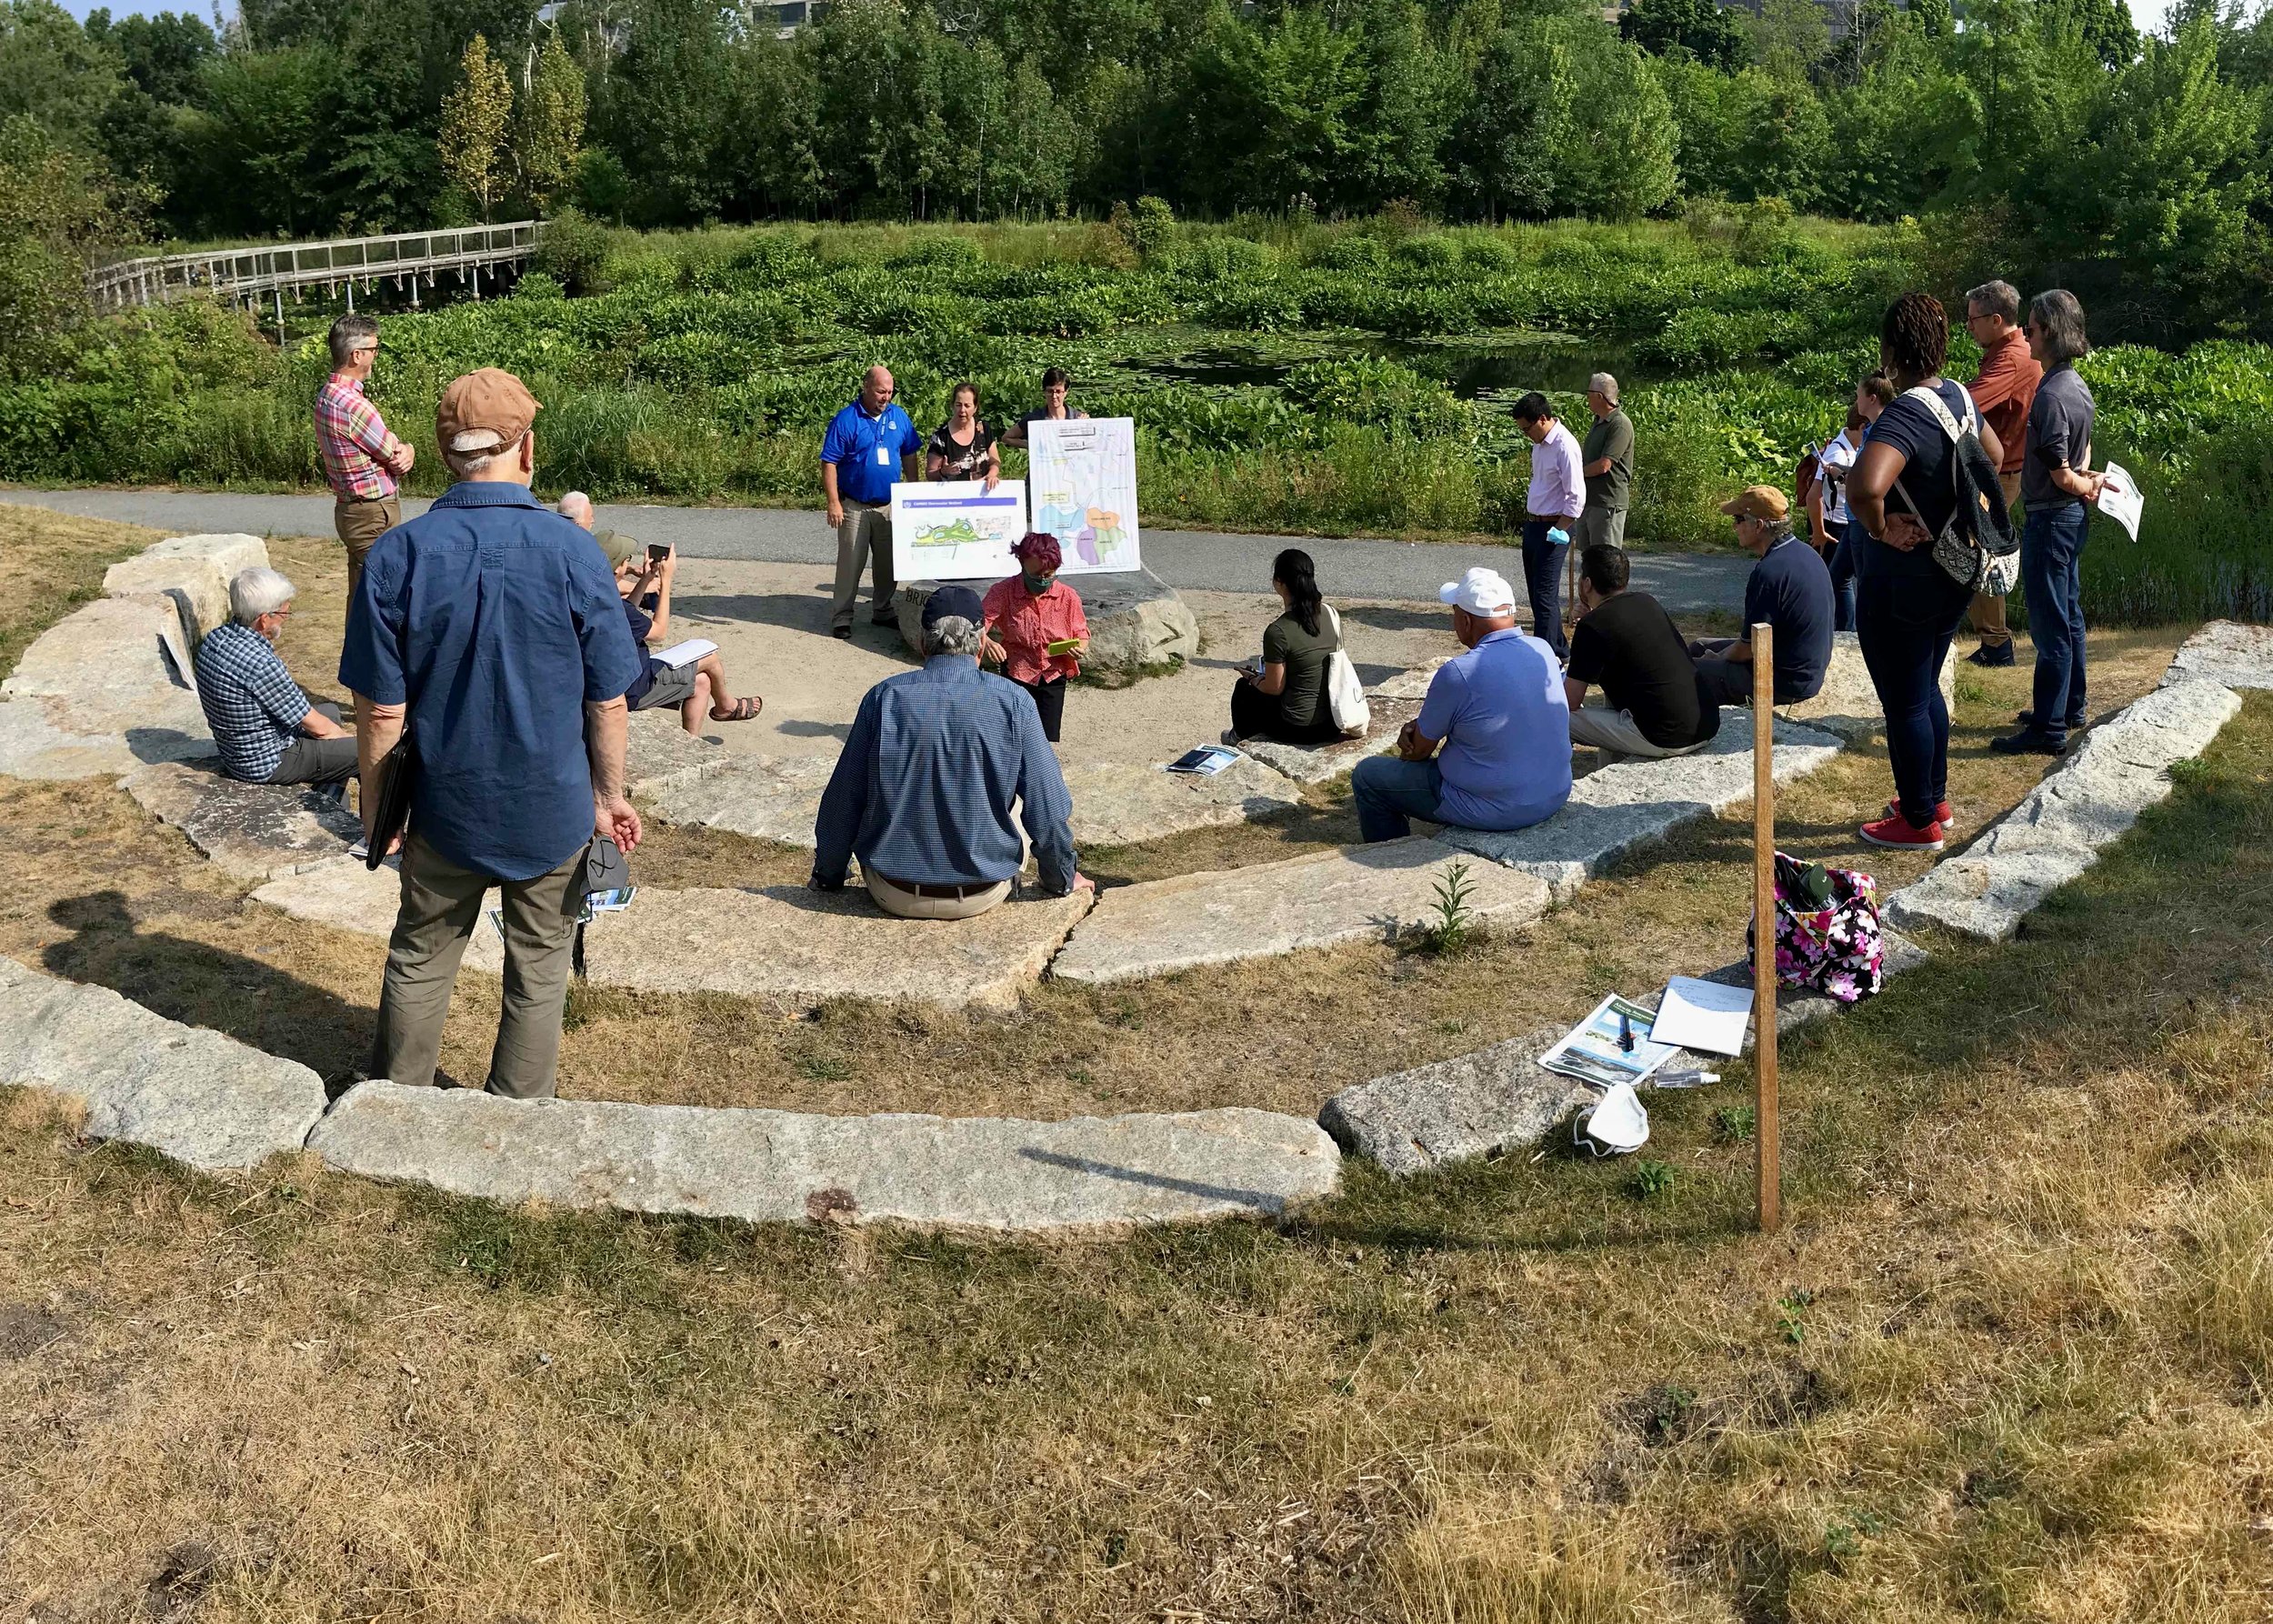  7.28.2022 | Here MyRWA Executive Director, Patrick Herron, attends an MWRA site walk to discuss  Combined Sewer Overflows (CSOs) . Combined sewer systems in the MWRA system and the cities of Cambridge, Somerville, and Chelsea discharge sewage direct